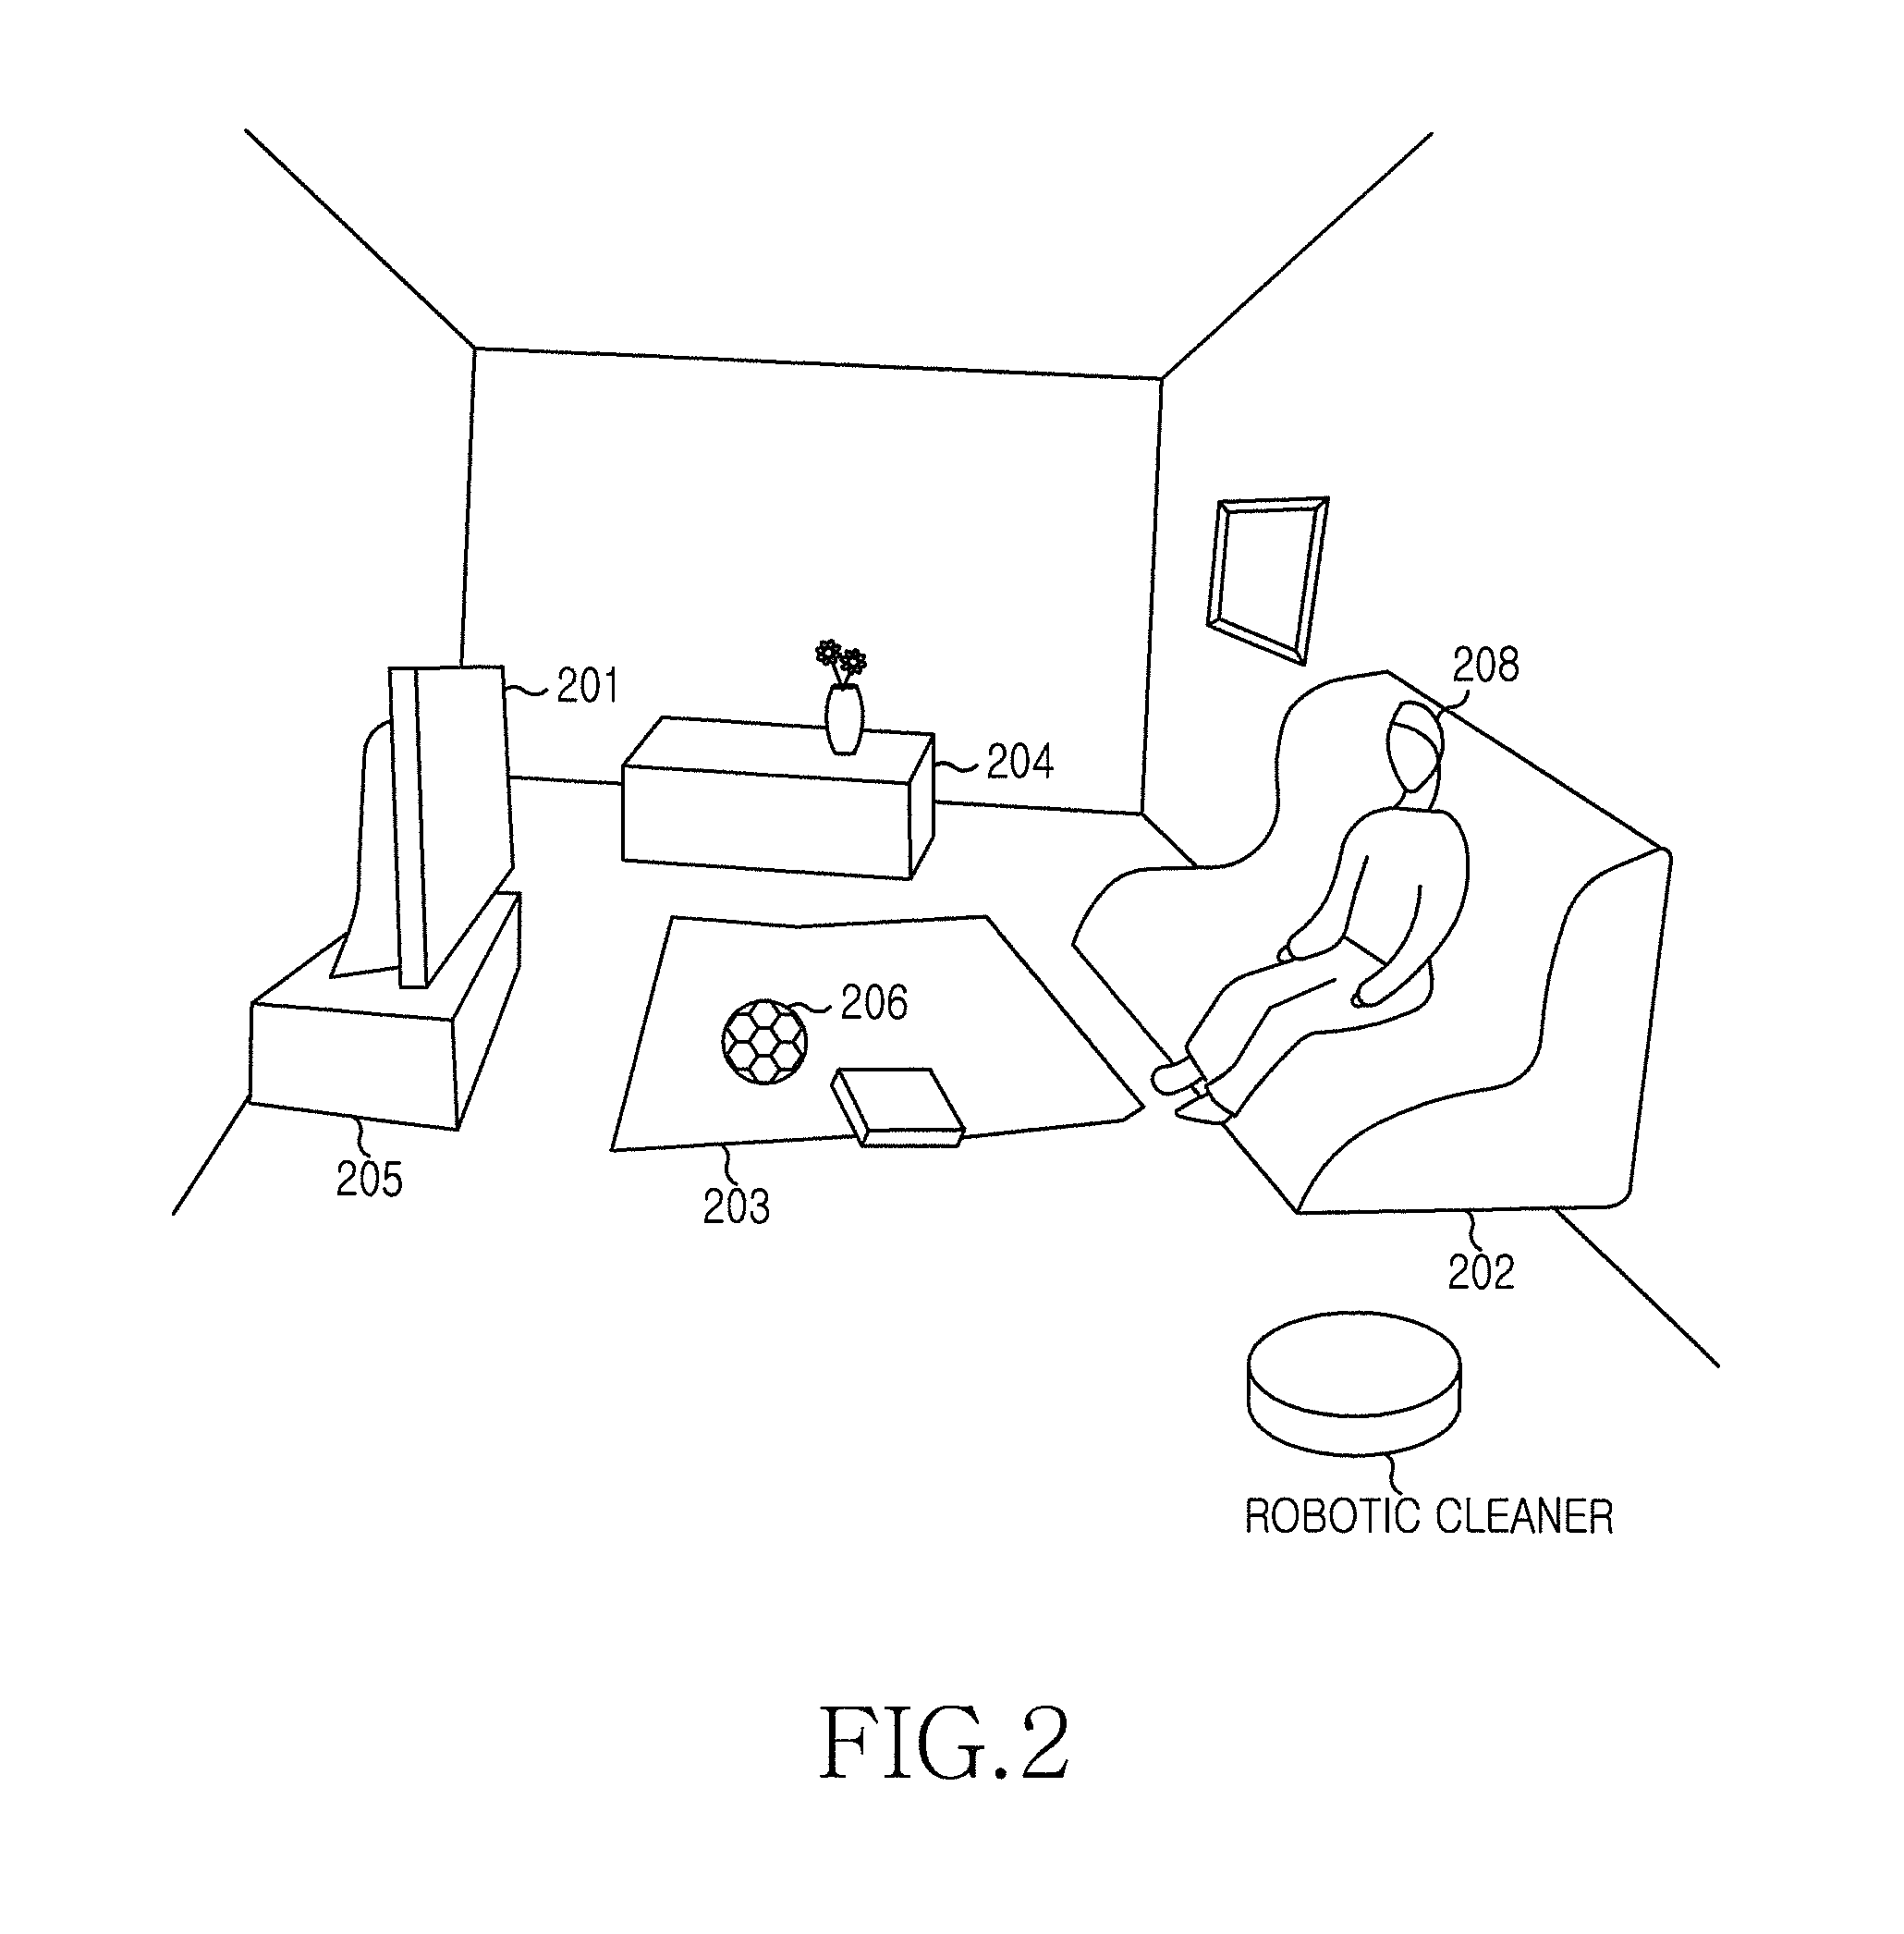 Apparatus and method for controlling cleaning in robotic cleaner